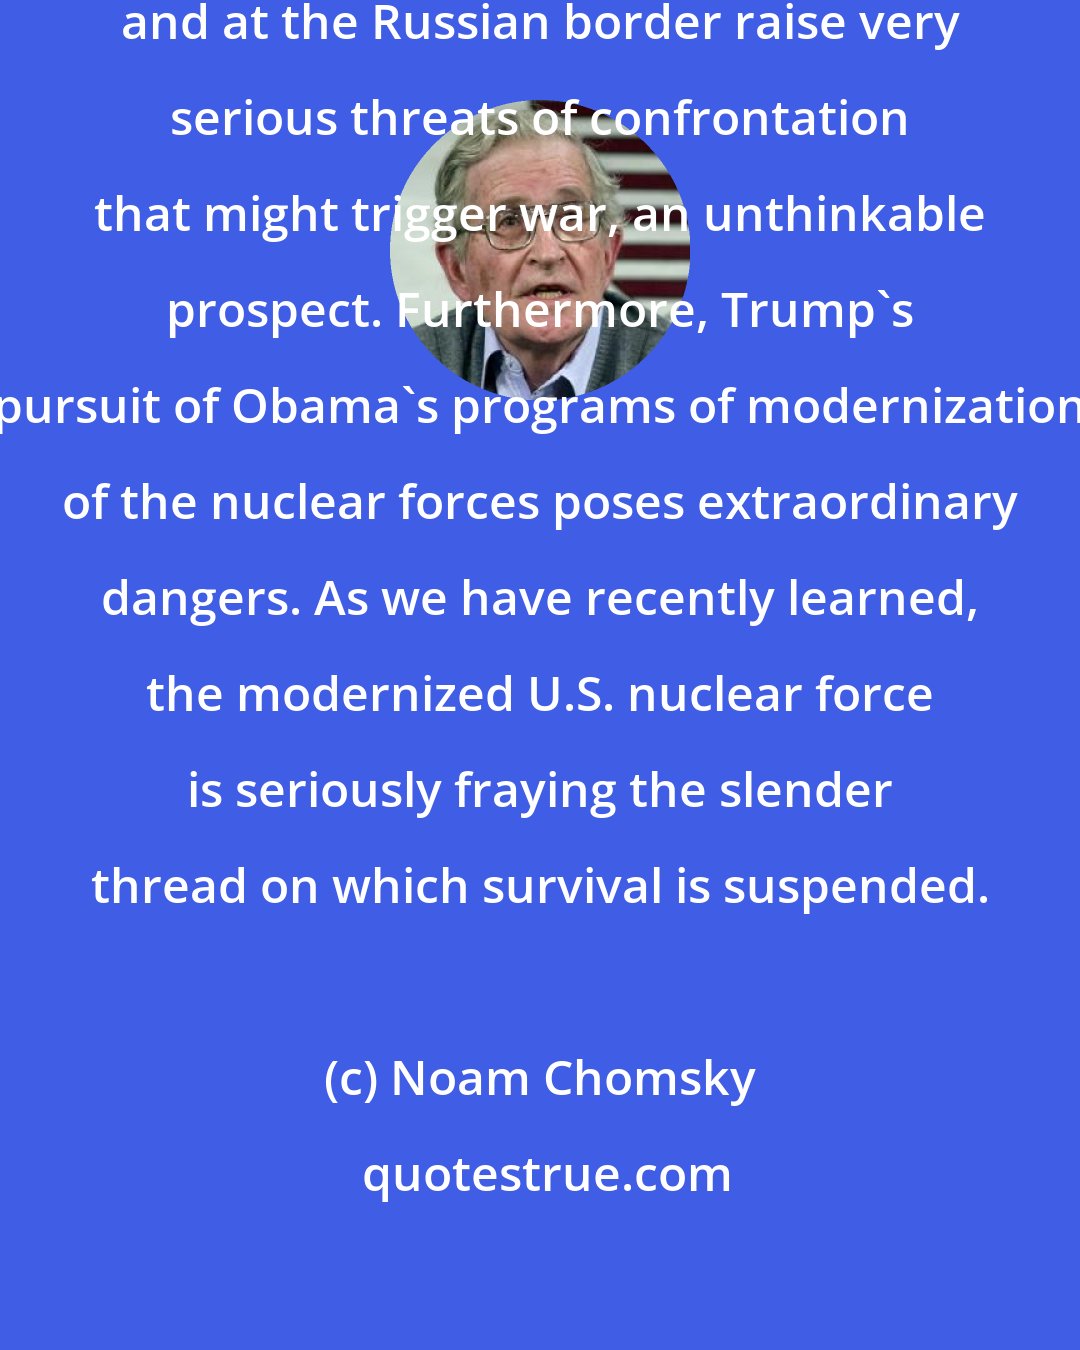 Noam Chomsky: On nuclear war, actions in Syria and at the Russian border raise very serious threats of confrontation that might trigger war, an unthinkable prospect. Furthermore, Trump's pursuit of Obama's programs of modernization of the nuclear forces poses extraordinary dangers. As we have recently learned, the modernized U.S. nuclear force is seriously fraying the slender thread on which survival is suspended.